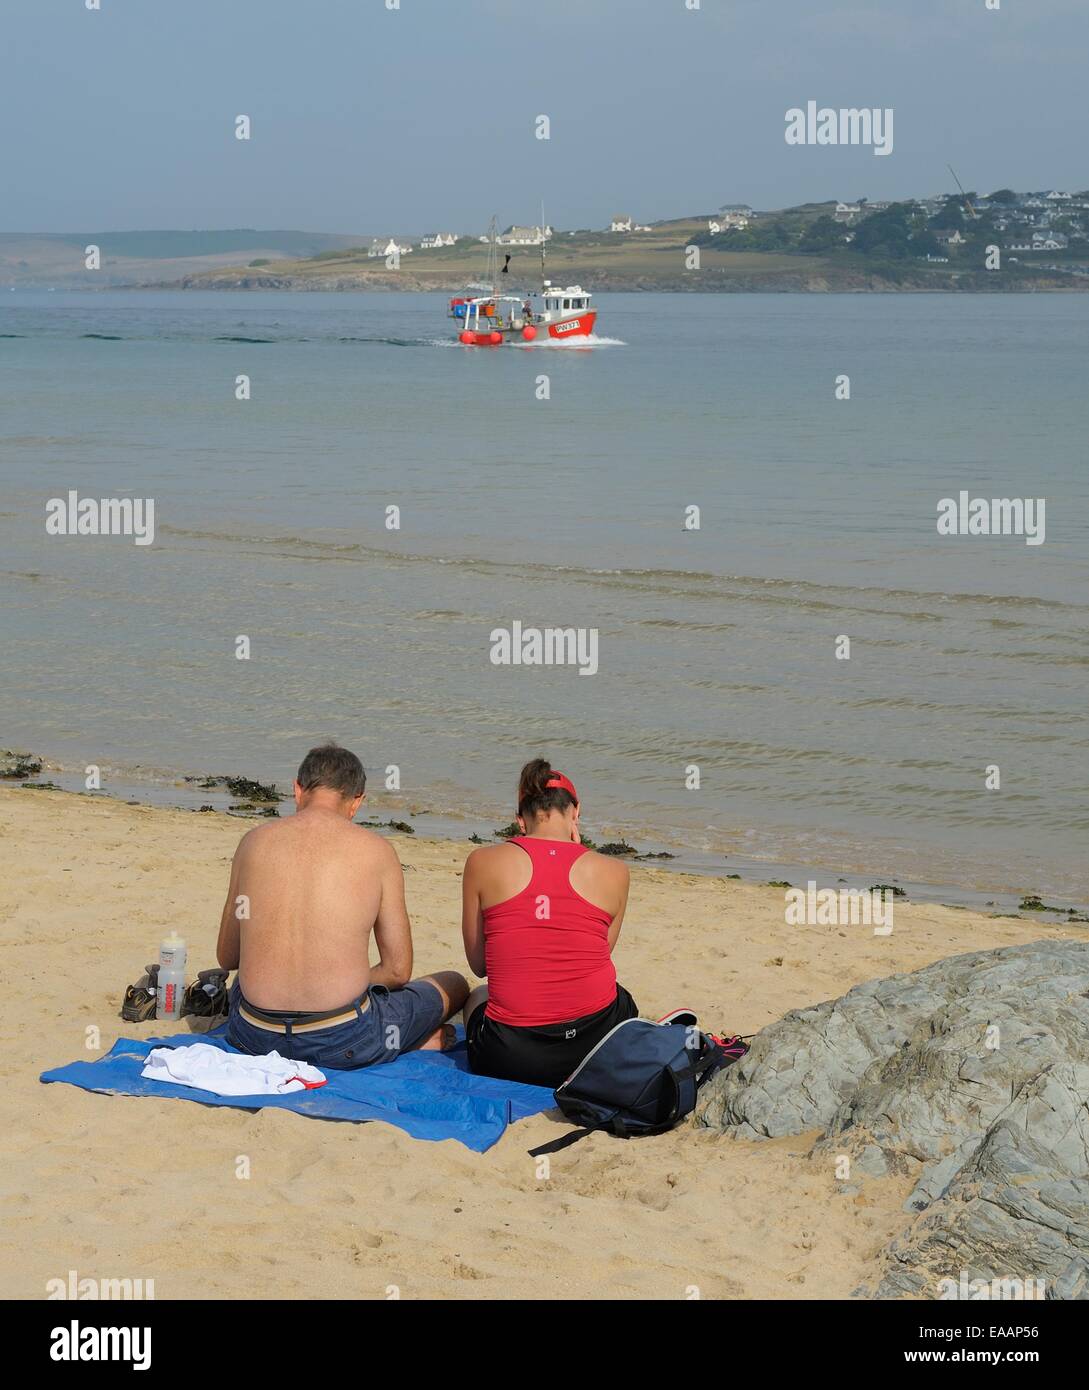 A man and a woman sitting on the beach in the Camel Estuary,Padstow,Cornwall,england uk Stock Photo